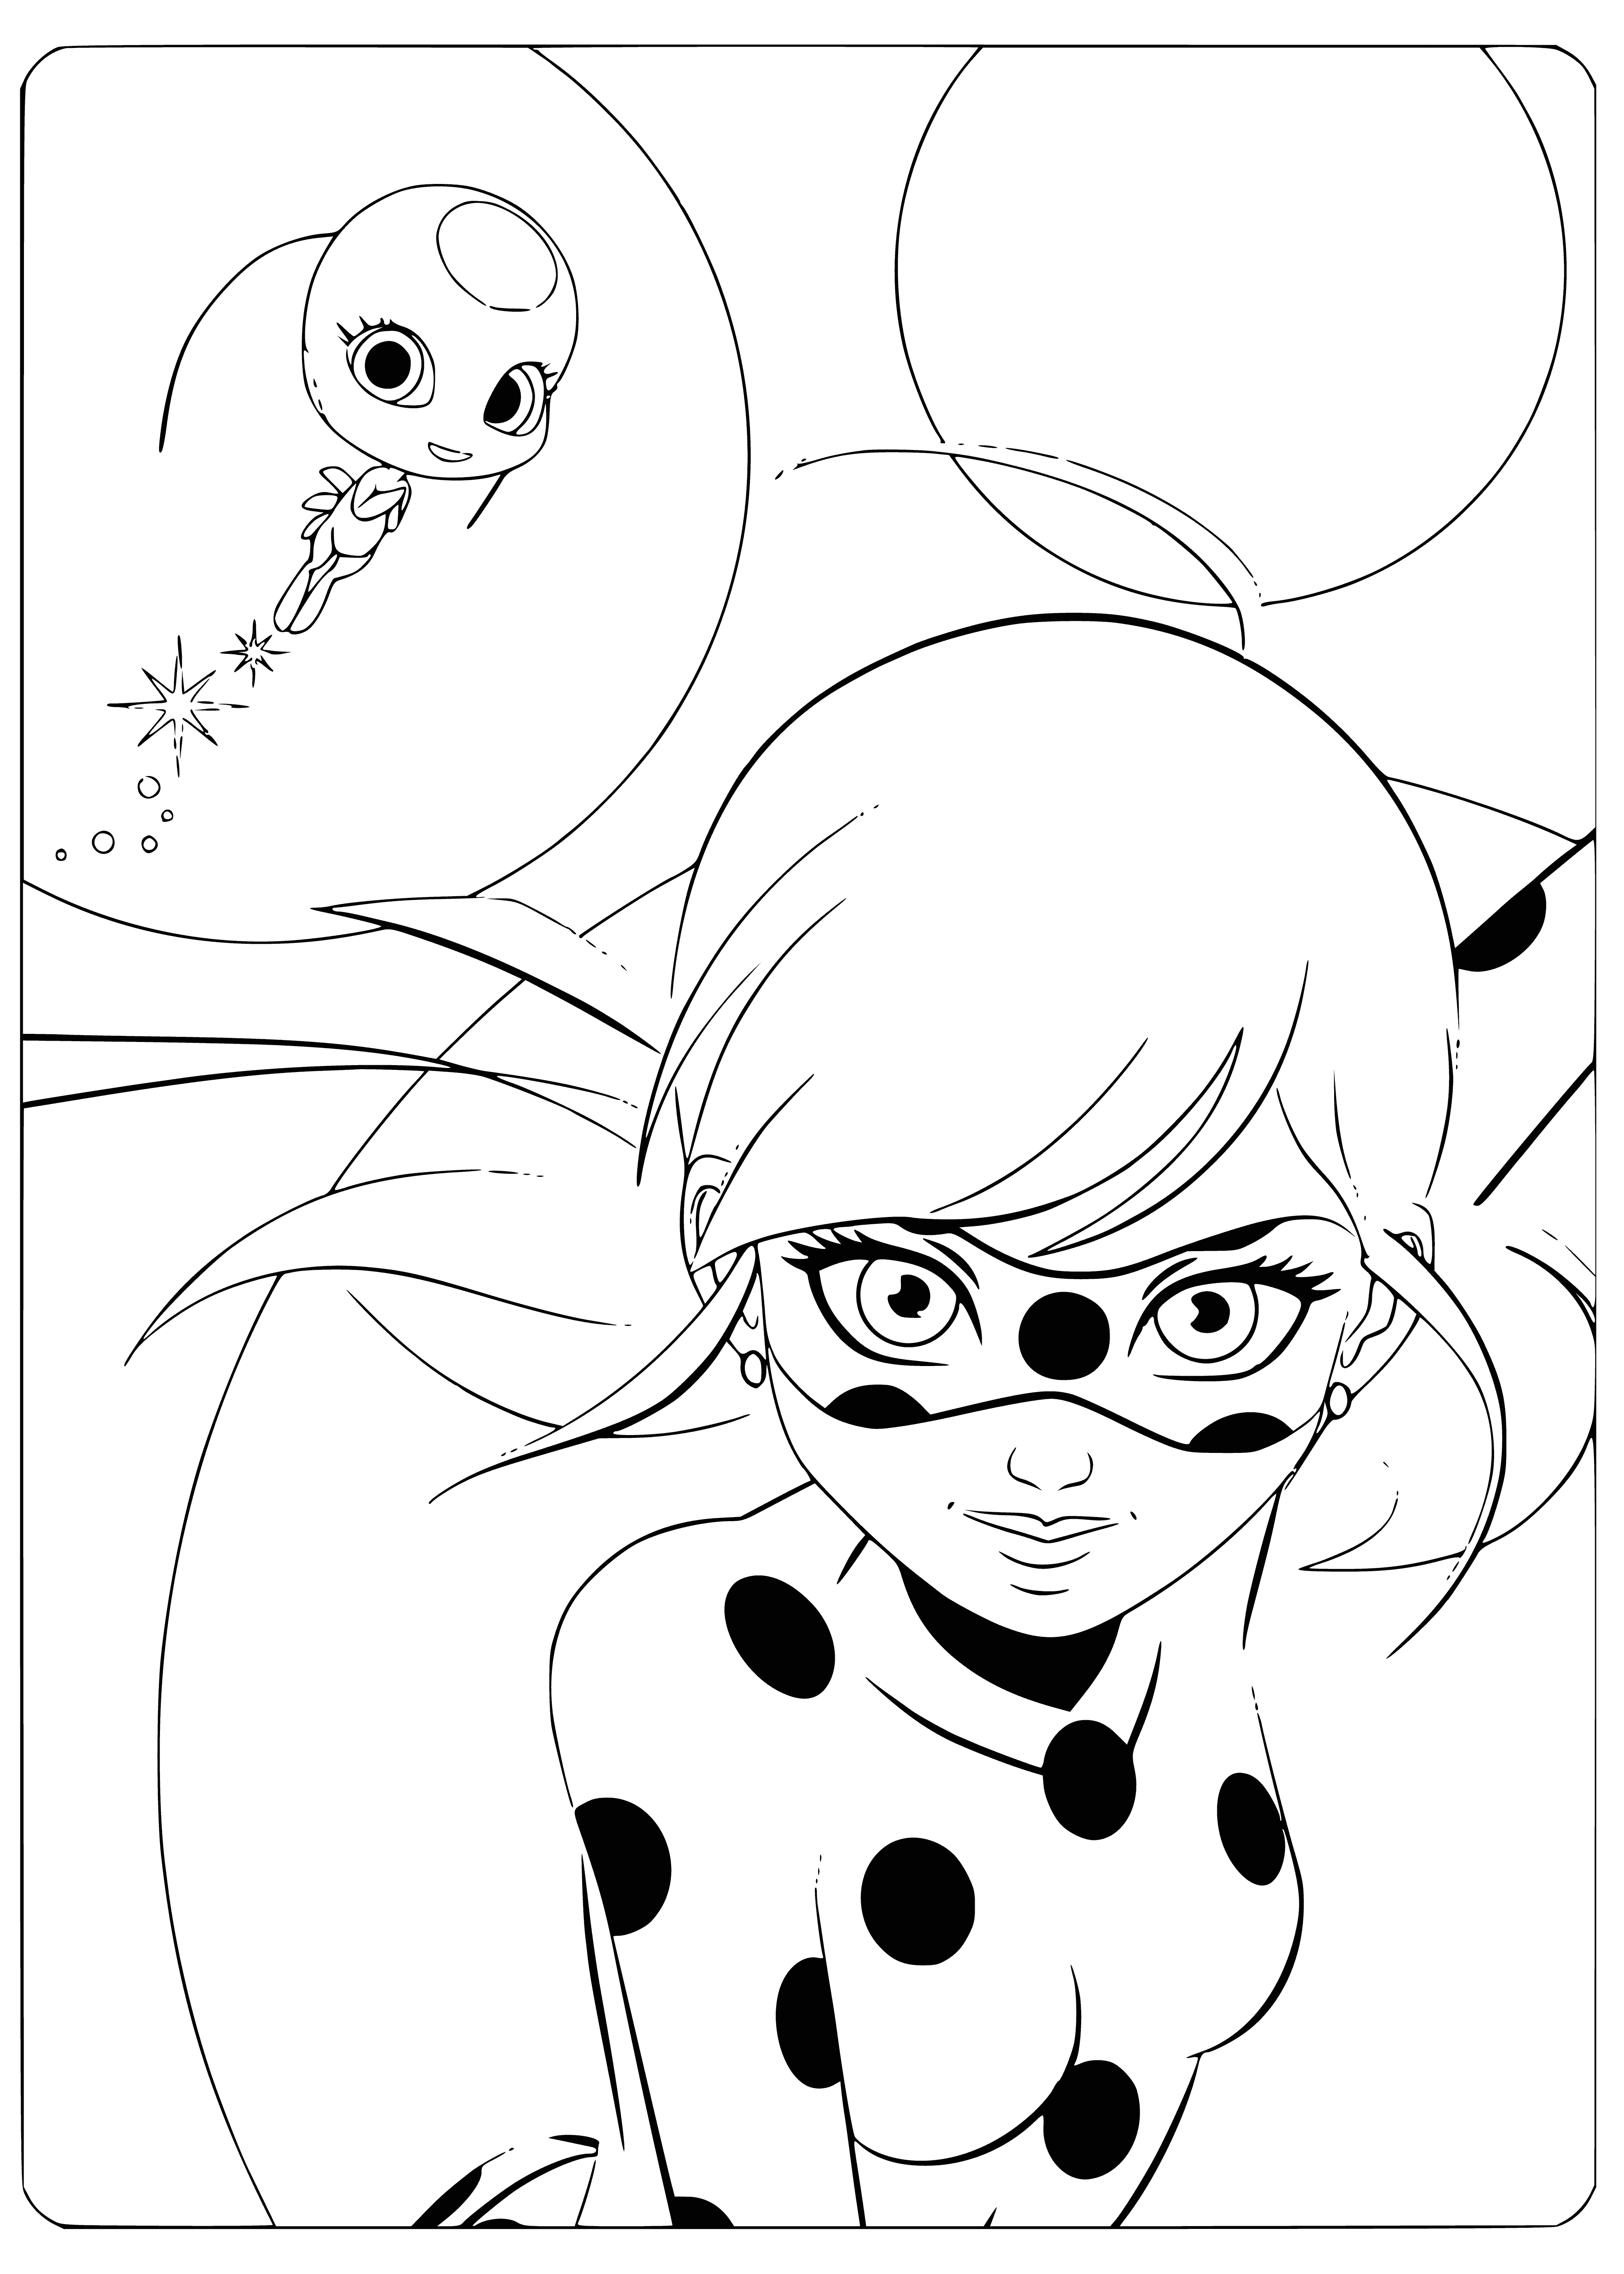 coloring page: Ladybug and Tikki stand on a rooftop, smiles ablaze, ready to take on adventure in their red and black costumes. #MiraculousLadybug